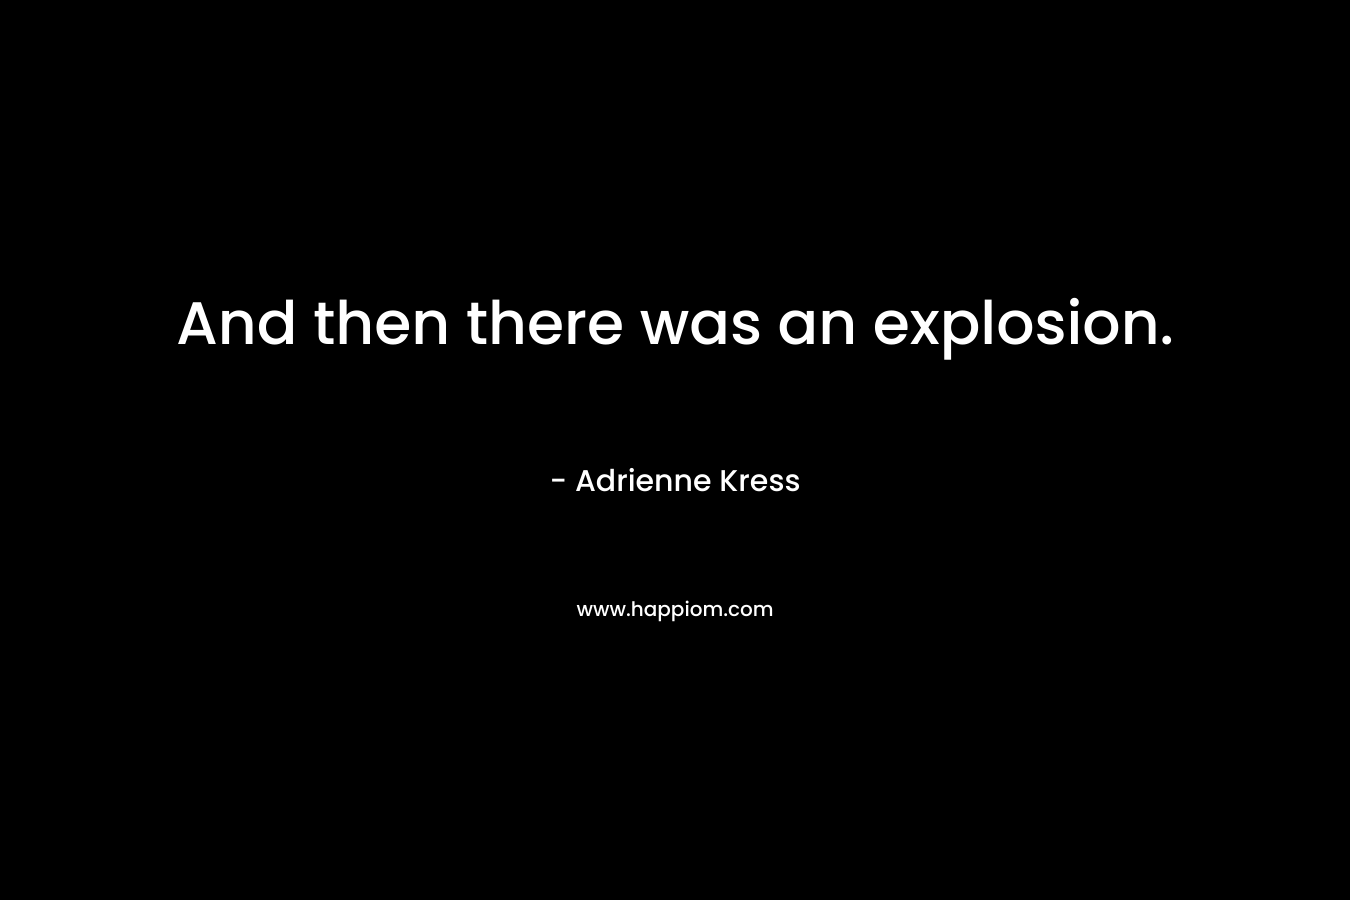 And then there was an explosion.